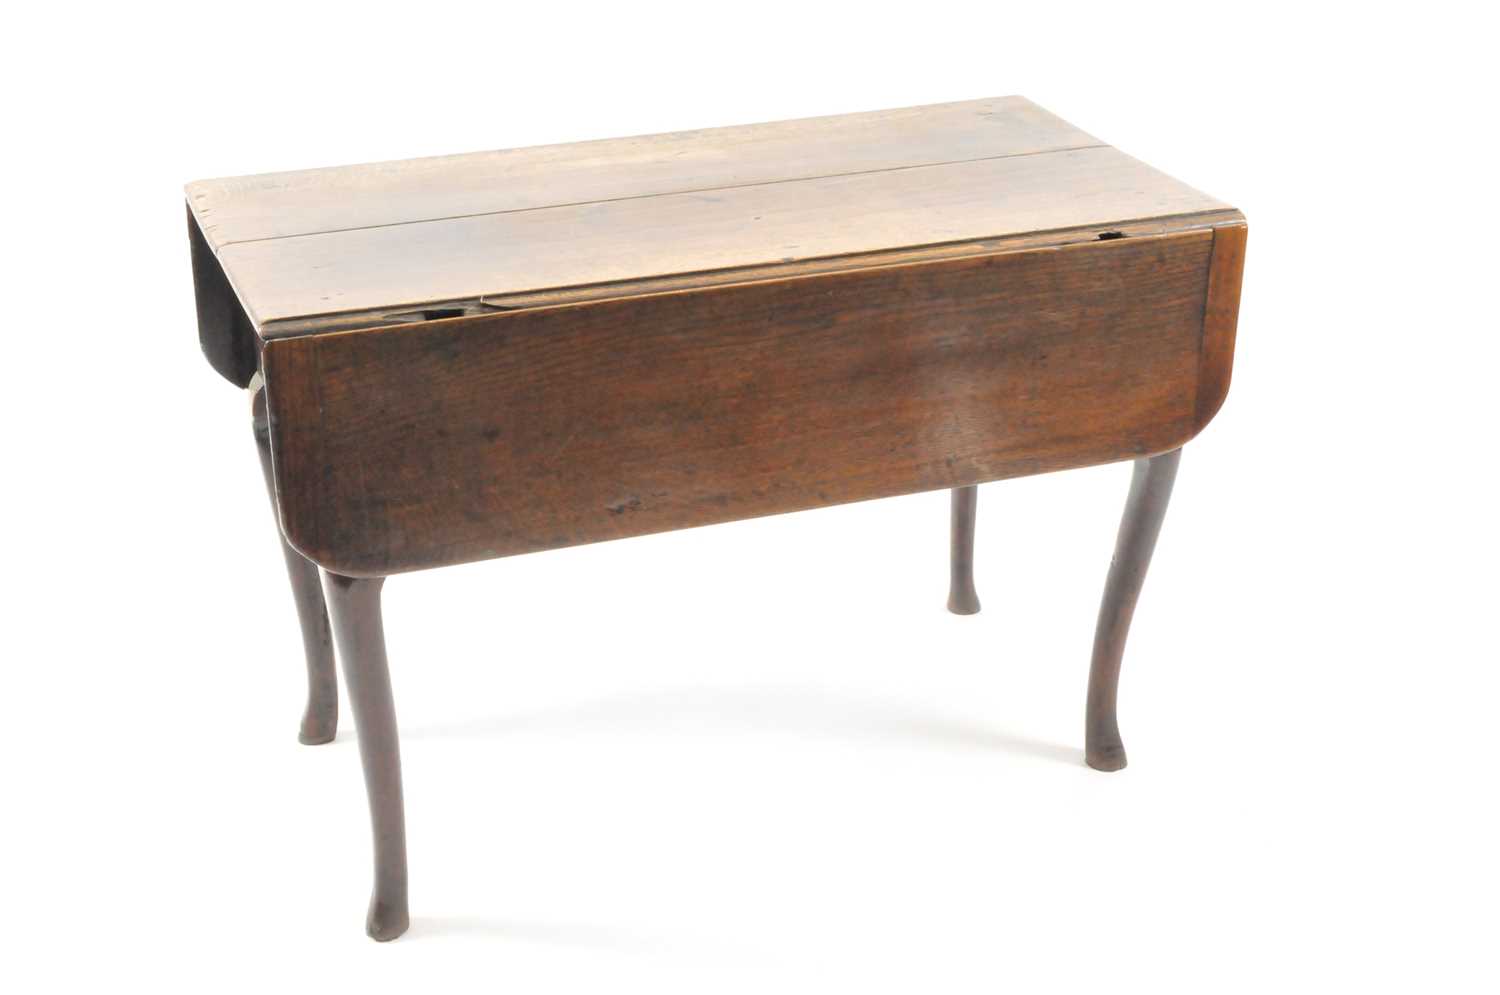 An early-mid 18th century oak single gateleg table, the rectangular top above arc d'arbelette shaped